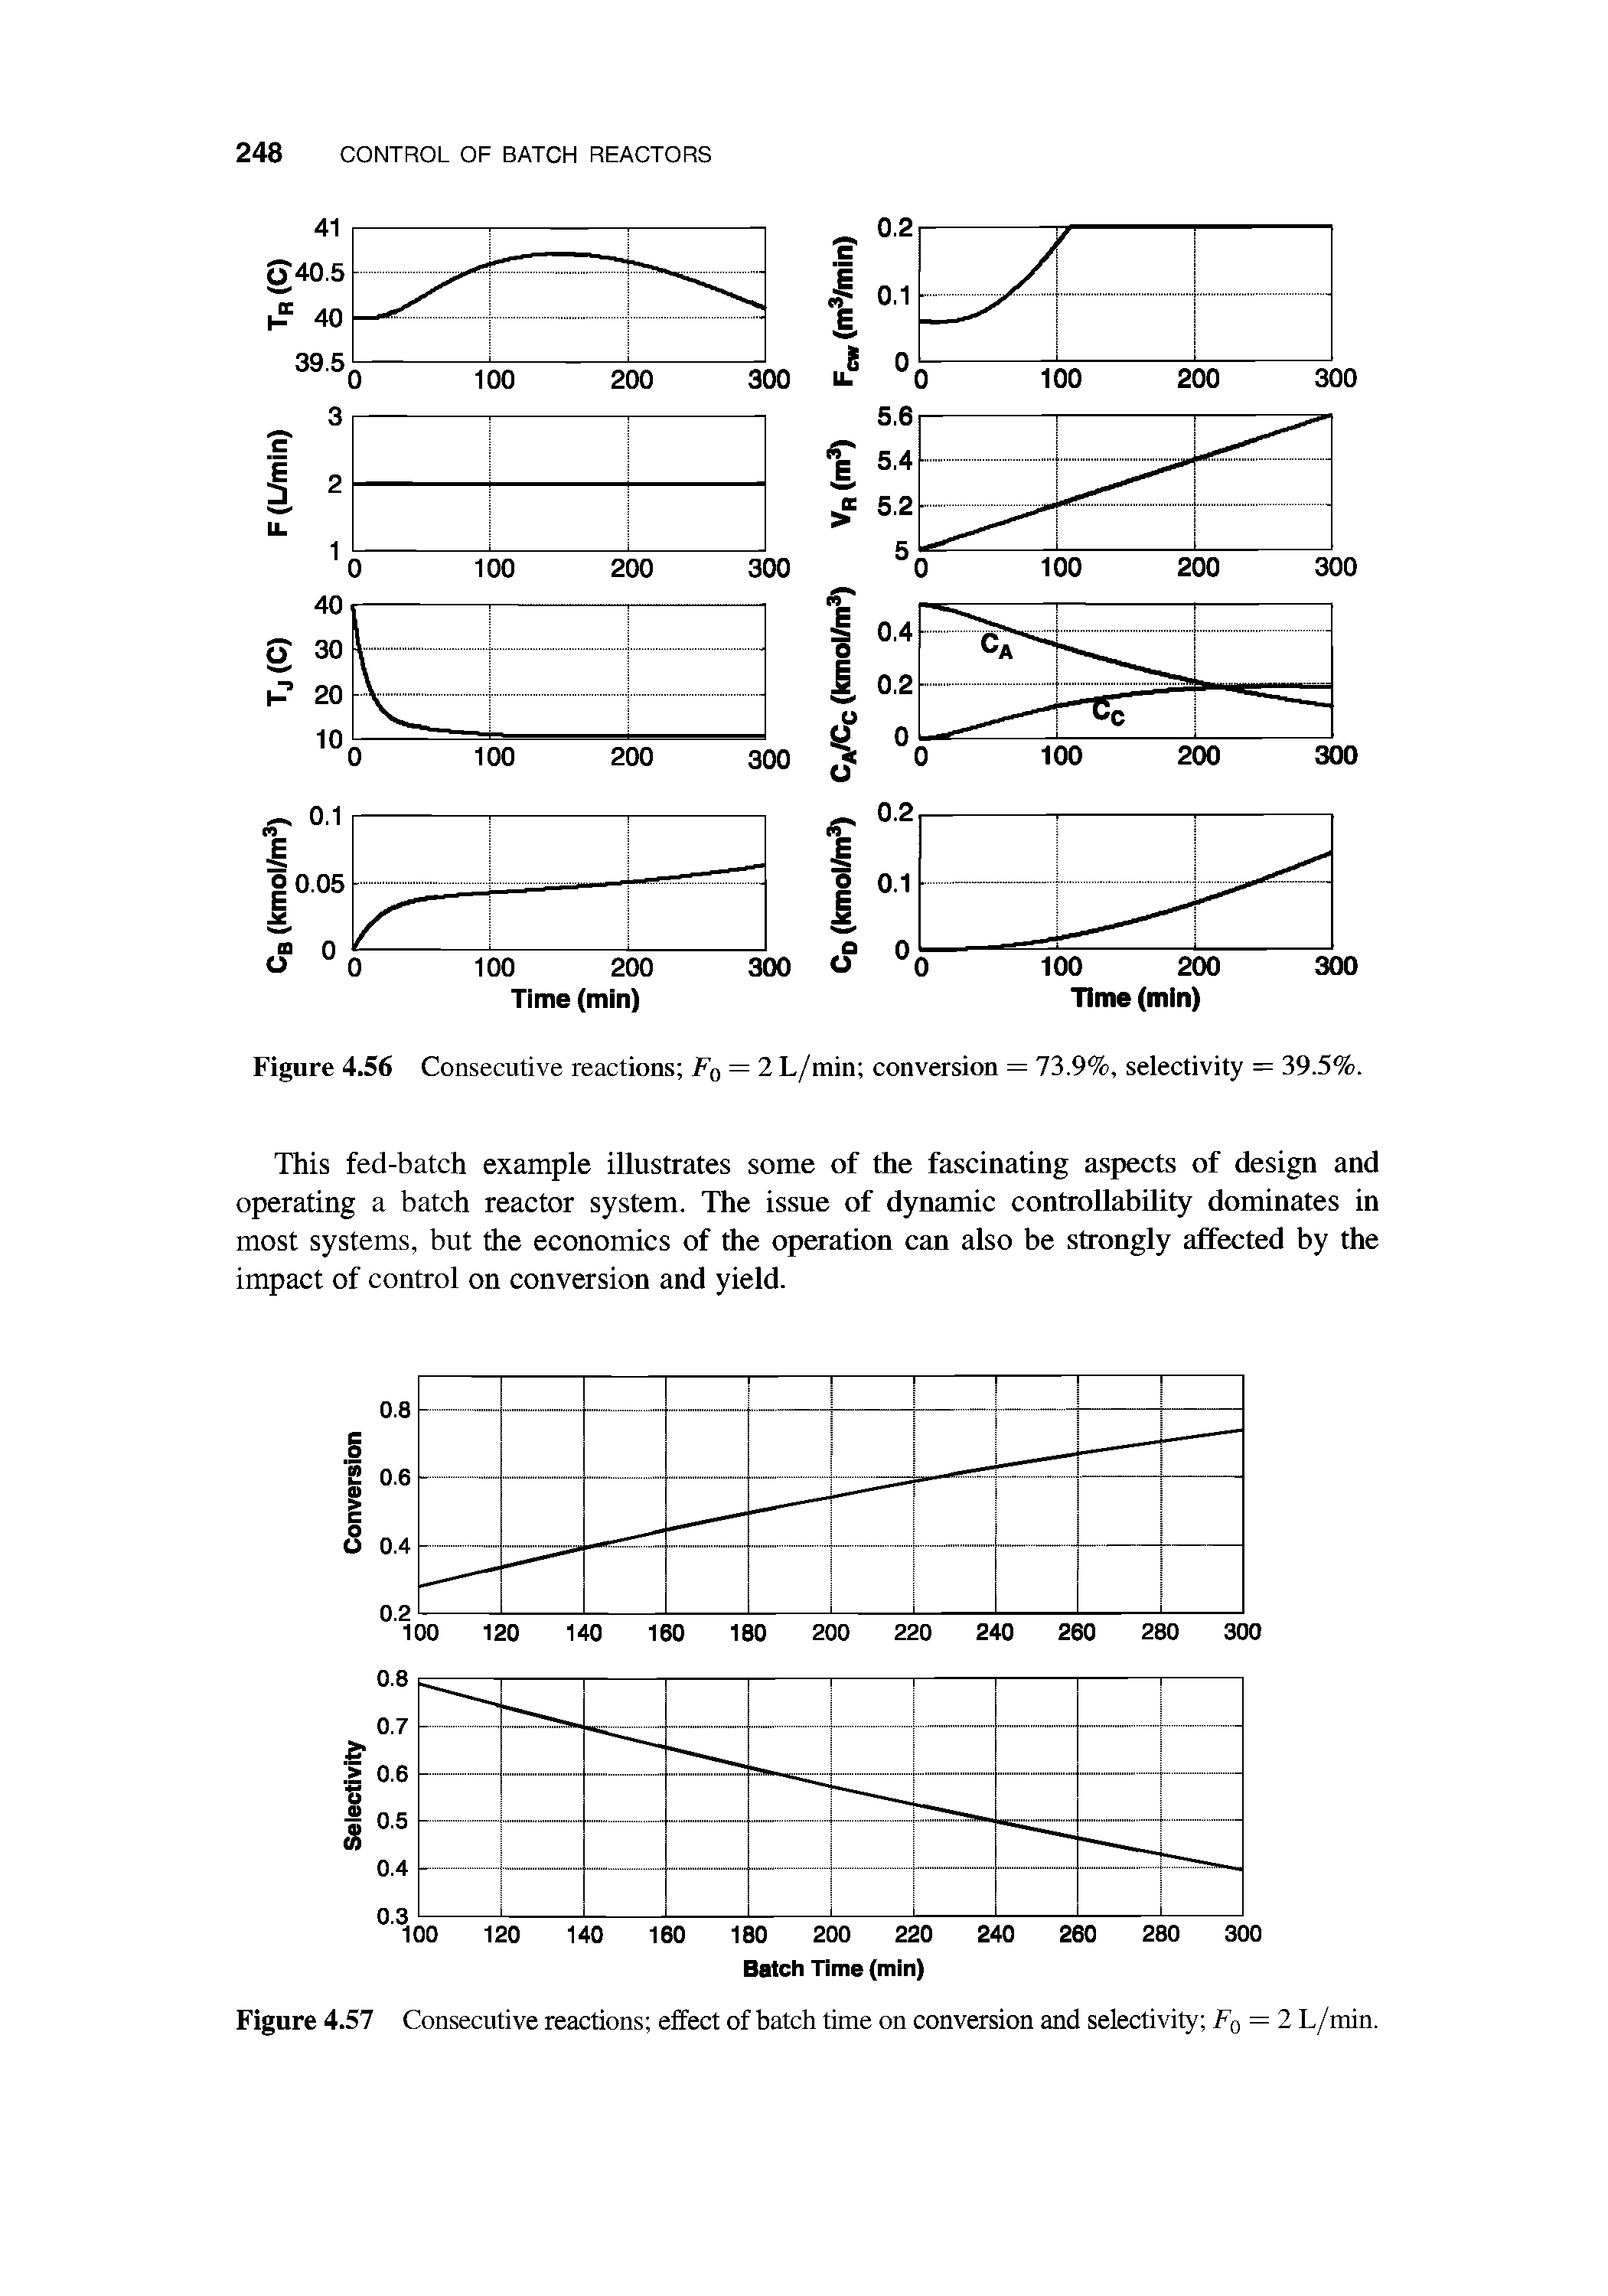 Figure 4.57 Consecutive reactions effect of batch time on conversion and selectivity F0 = 2 L/min.